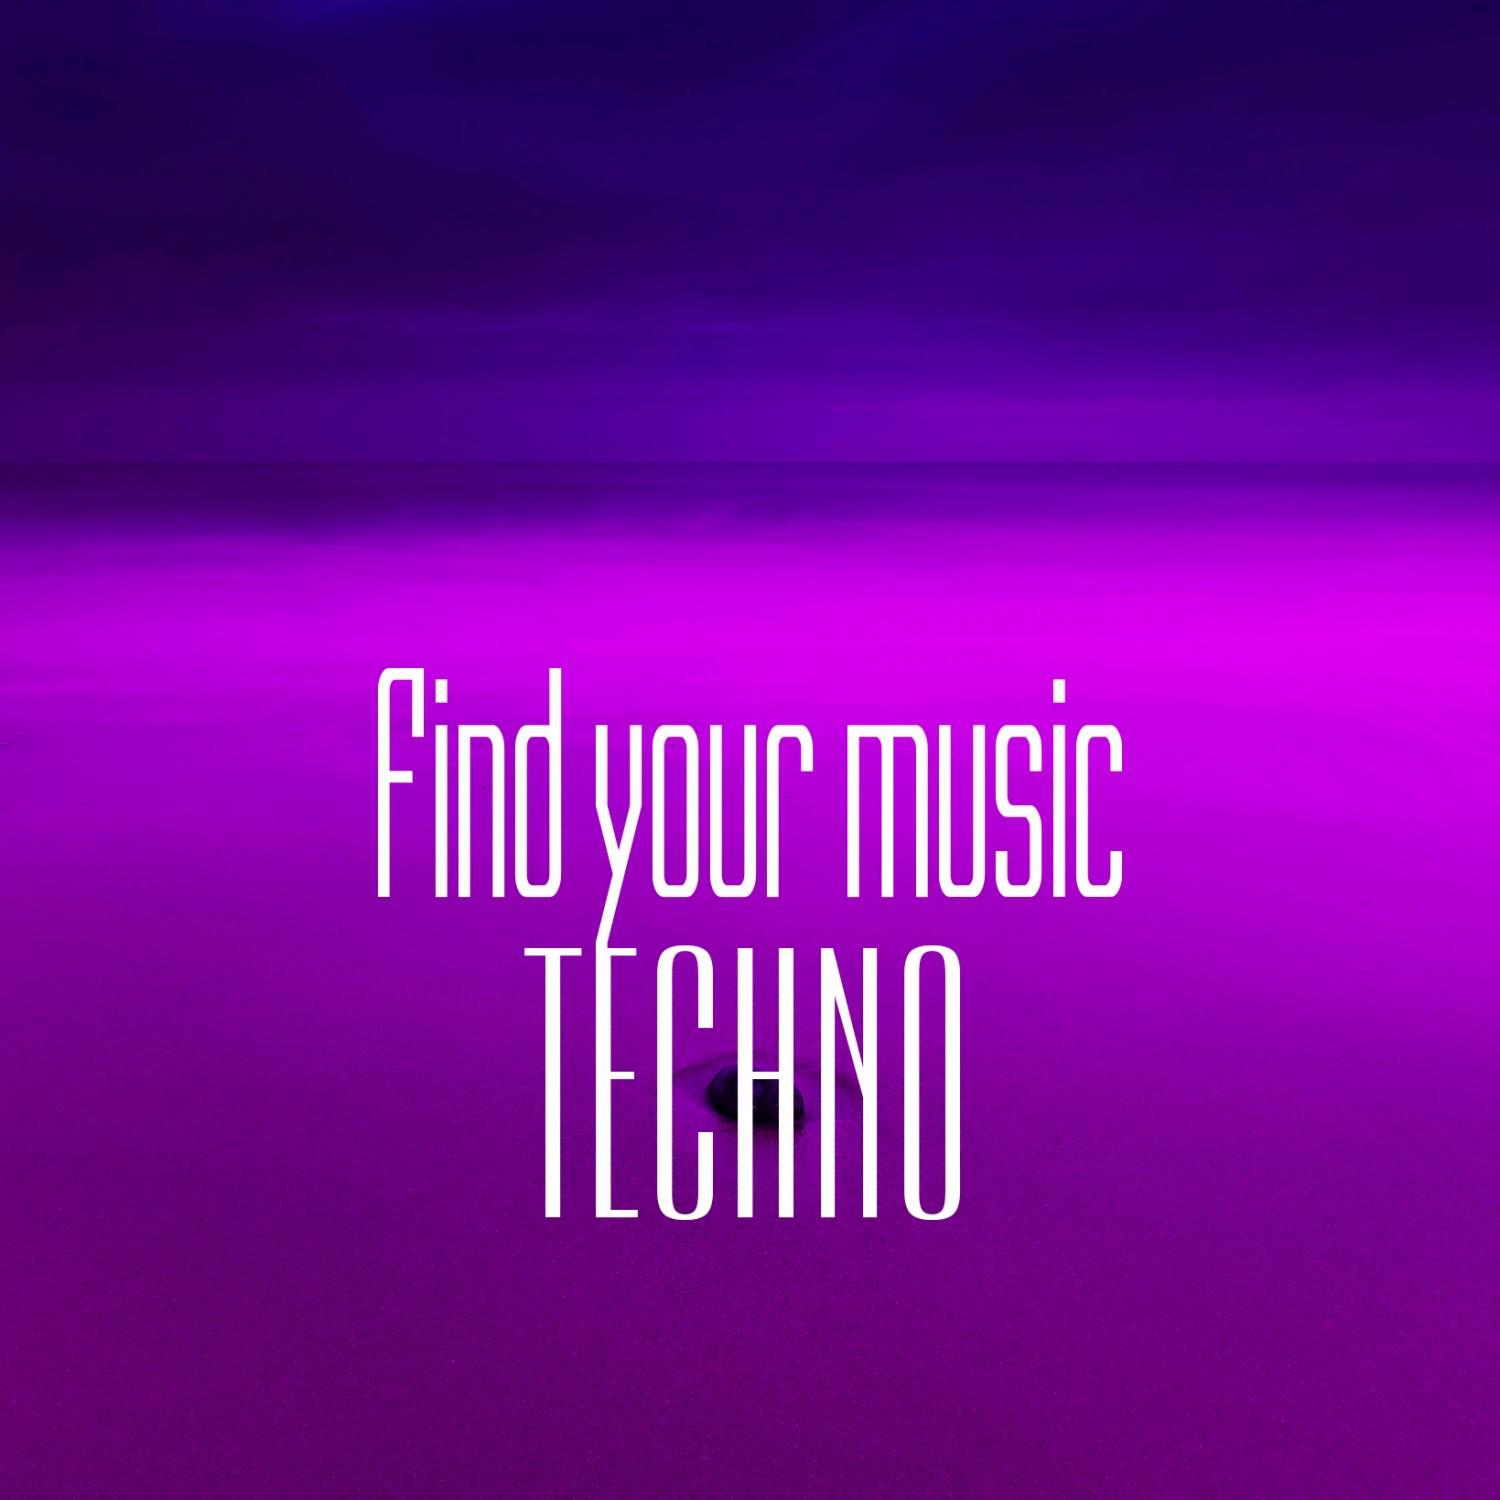 Find Your Music. Techno